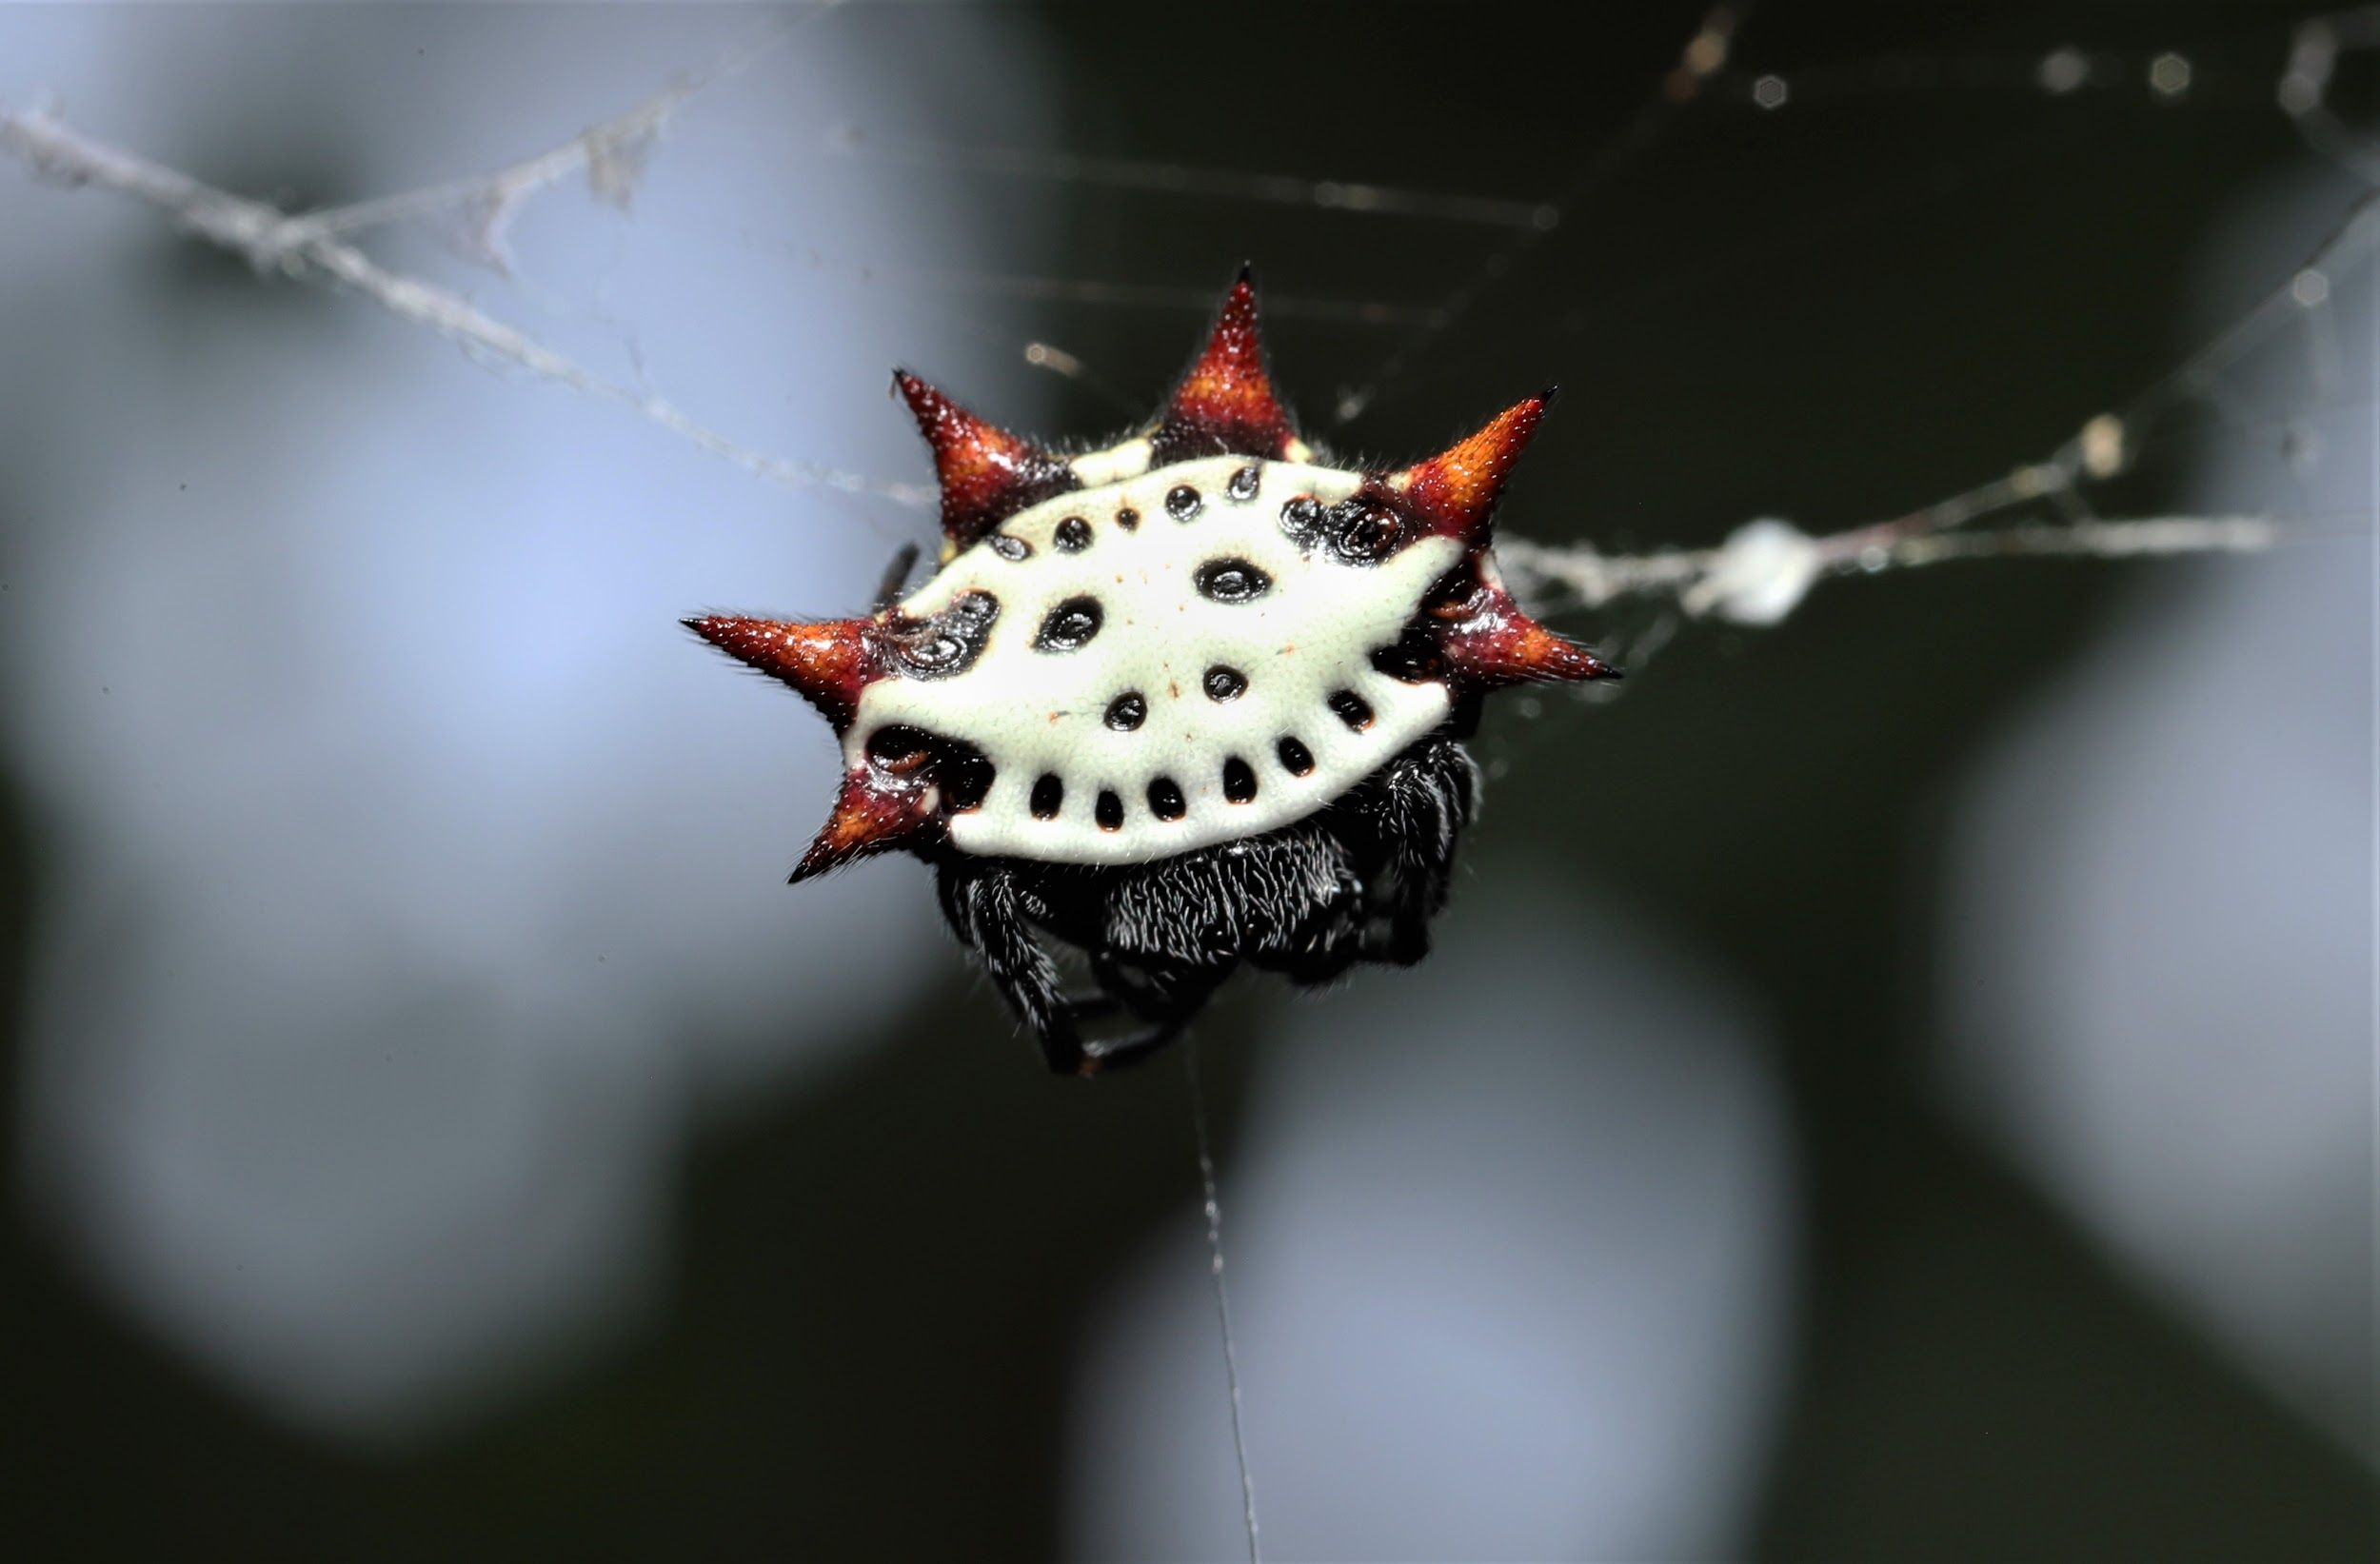 Female spiny-backed orb weaver (Gasteracantha cancriformis) resting in her orb web. These spiders can range in color from white with red spines to yellow with black spines. 